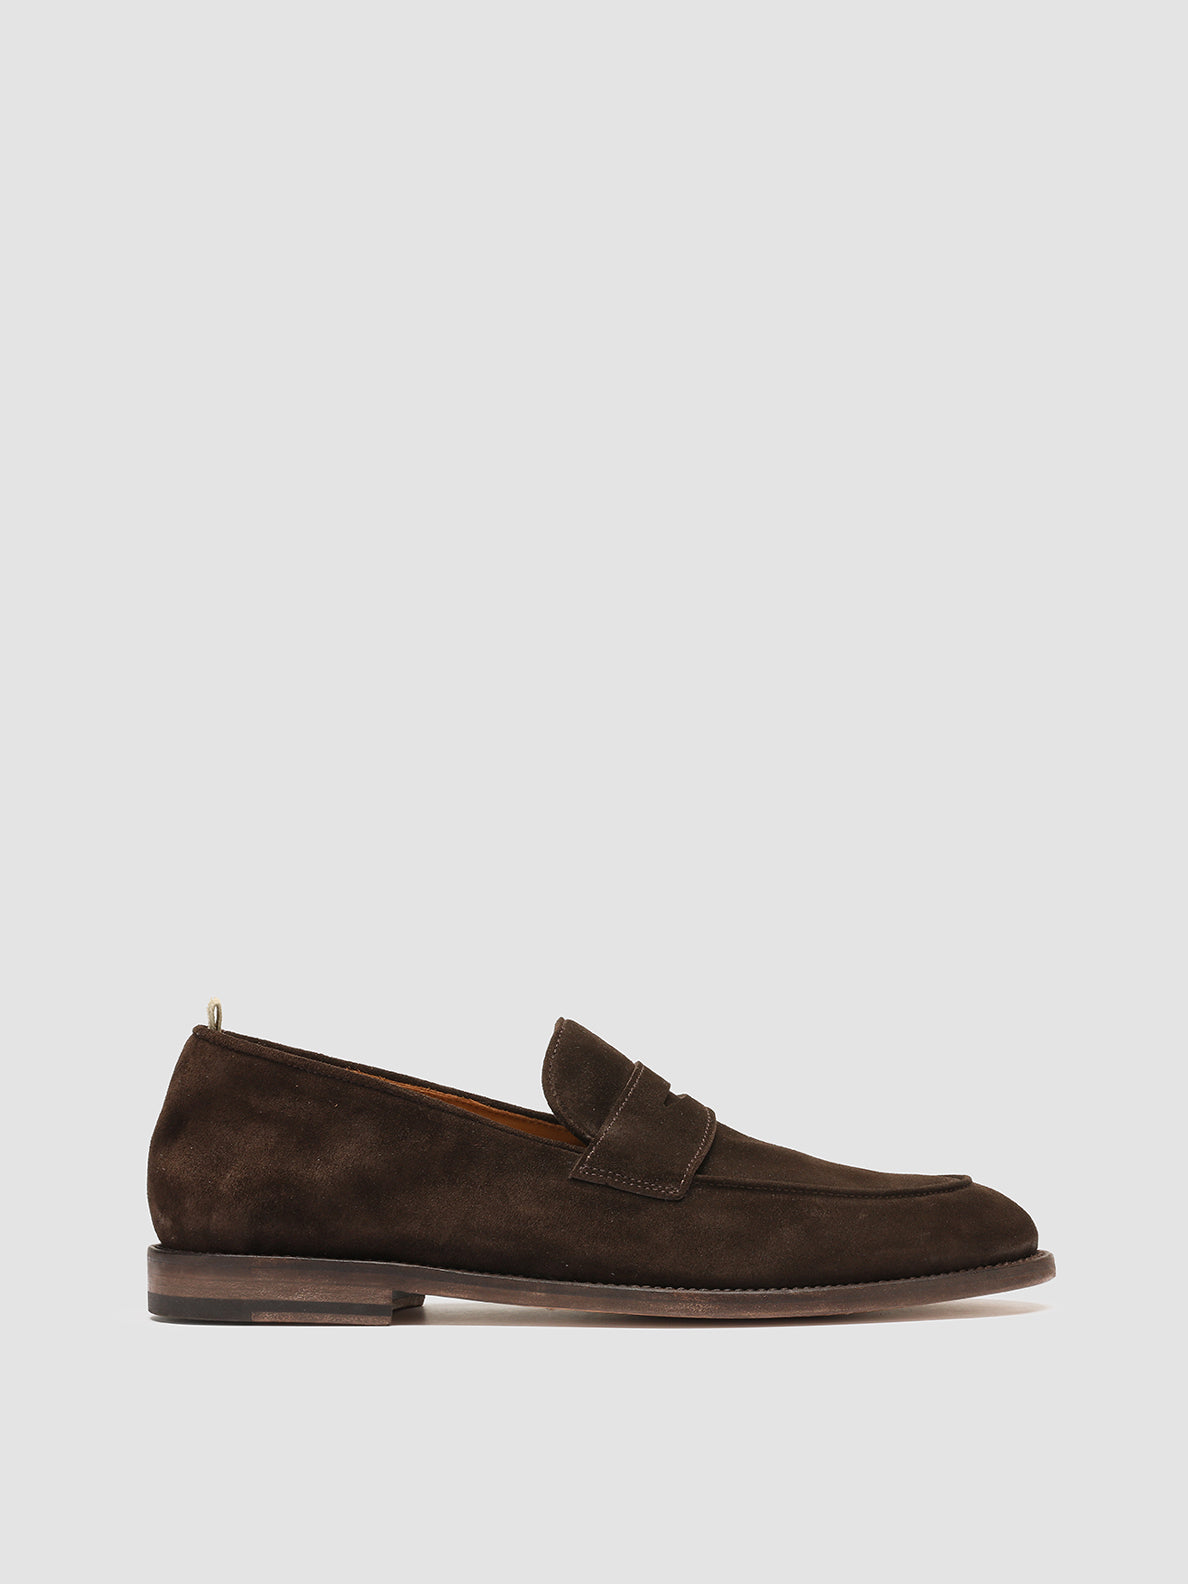 Mens Brown Suede Penny Loafers: OPERA 001 – Officine Creative USA